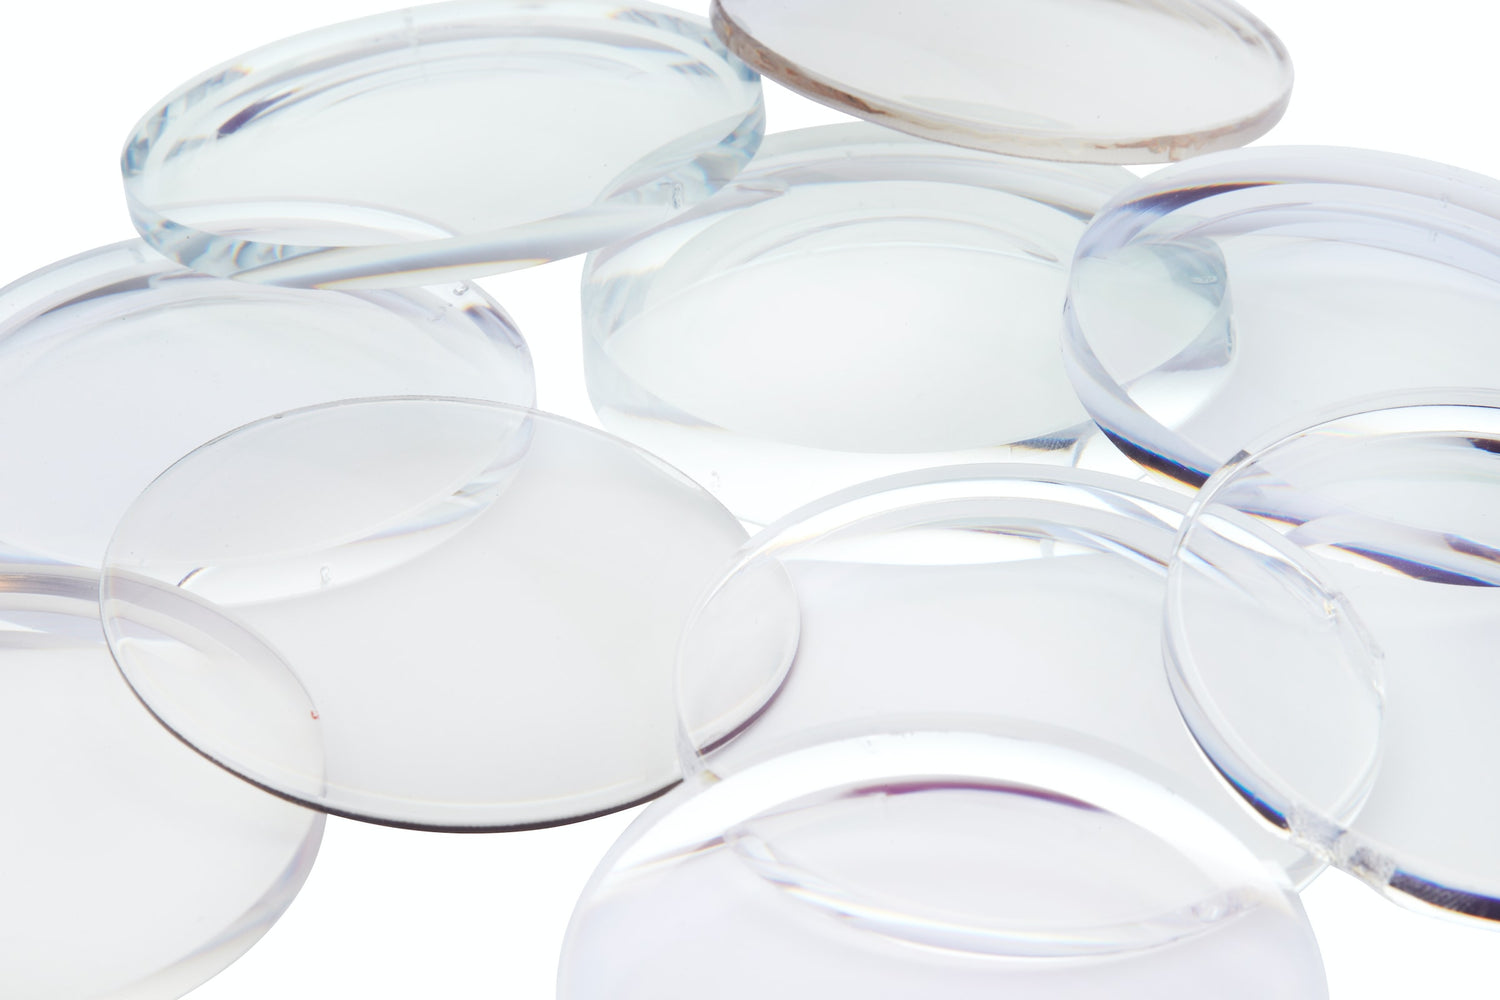 Helping Contact Lens Users Feel Better With REST